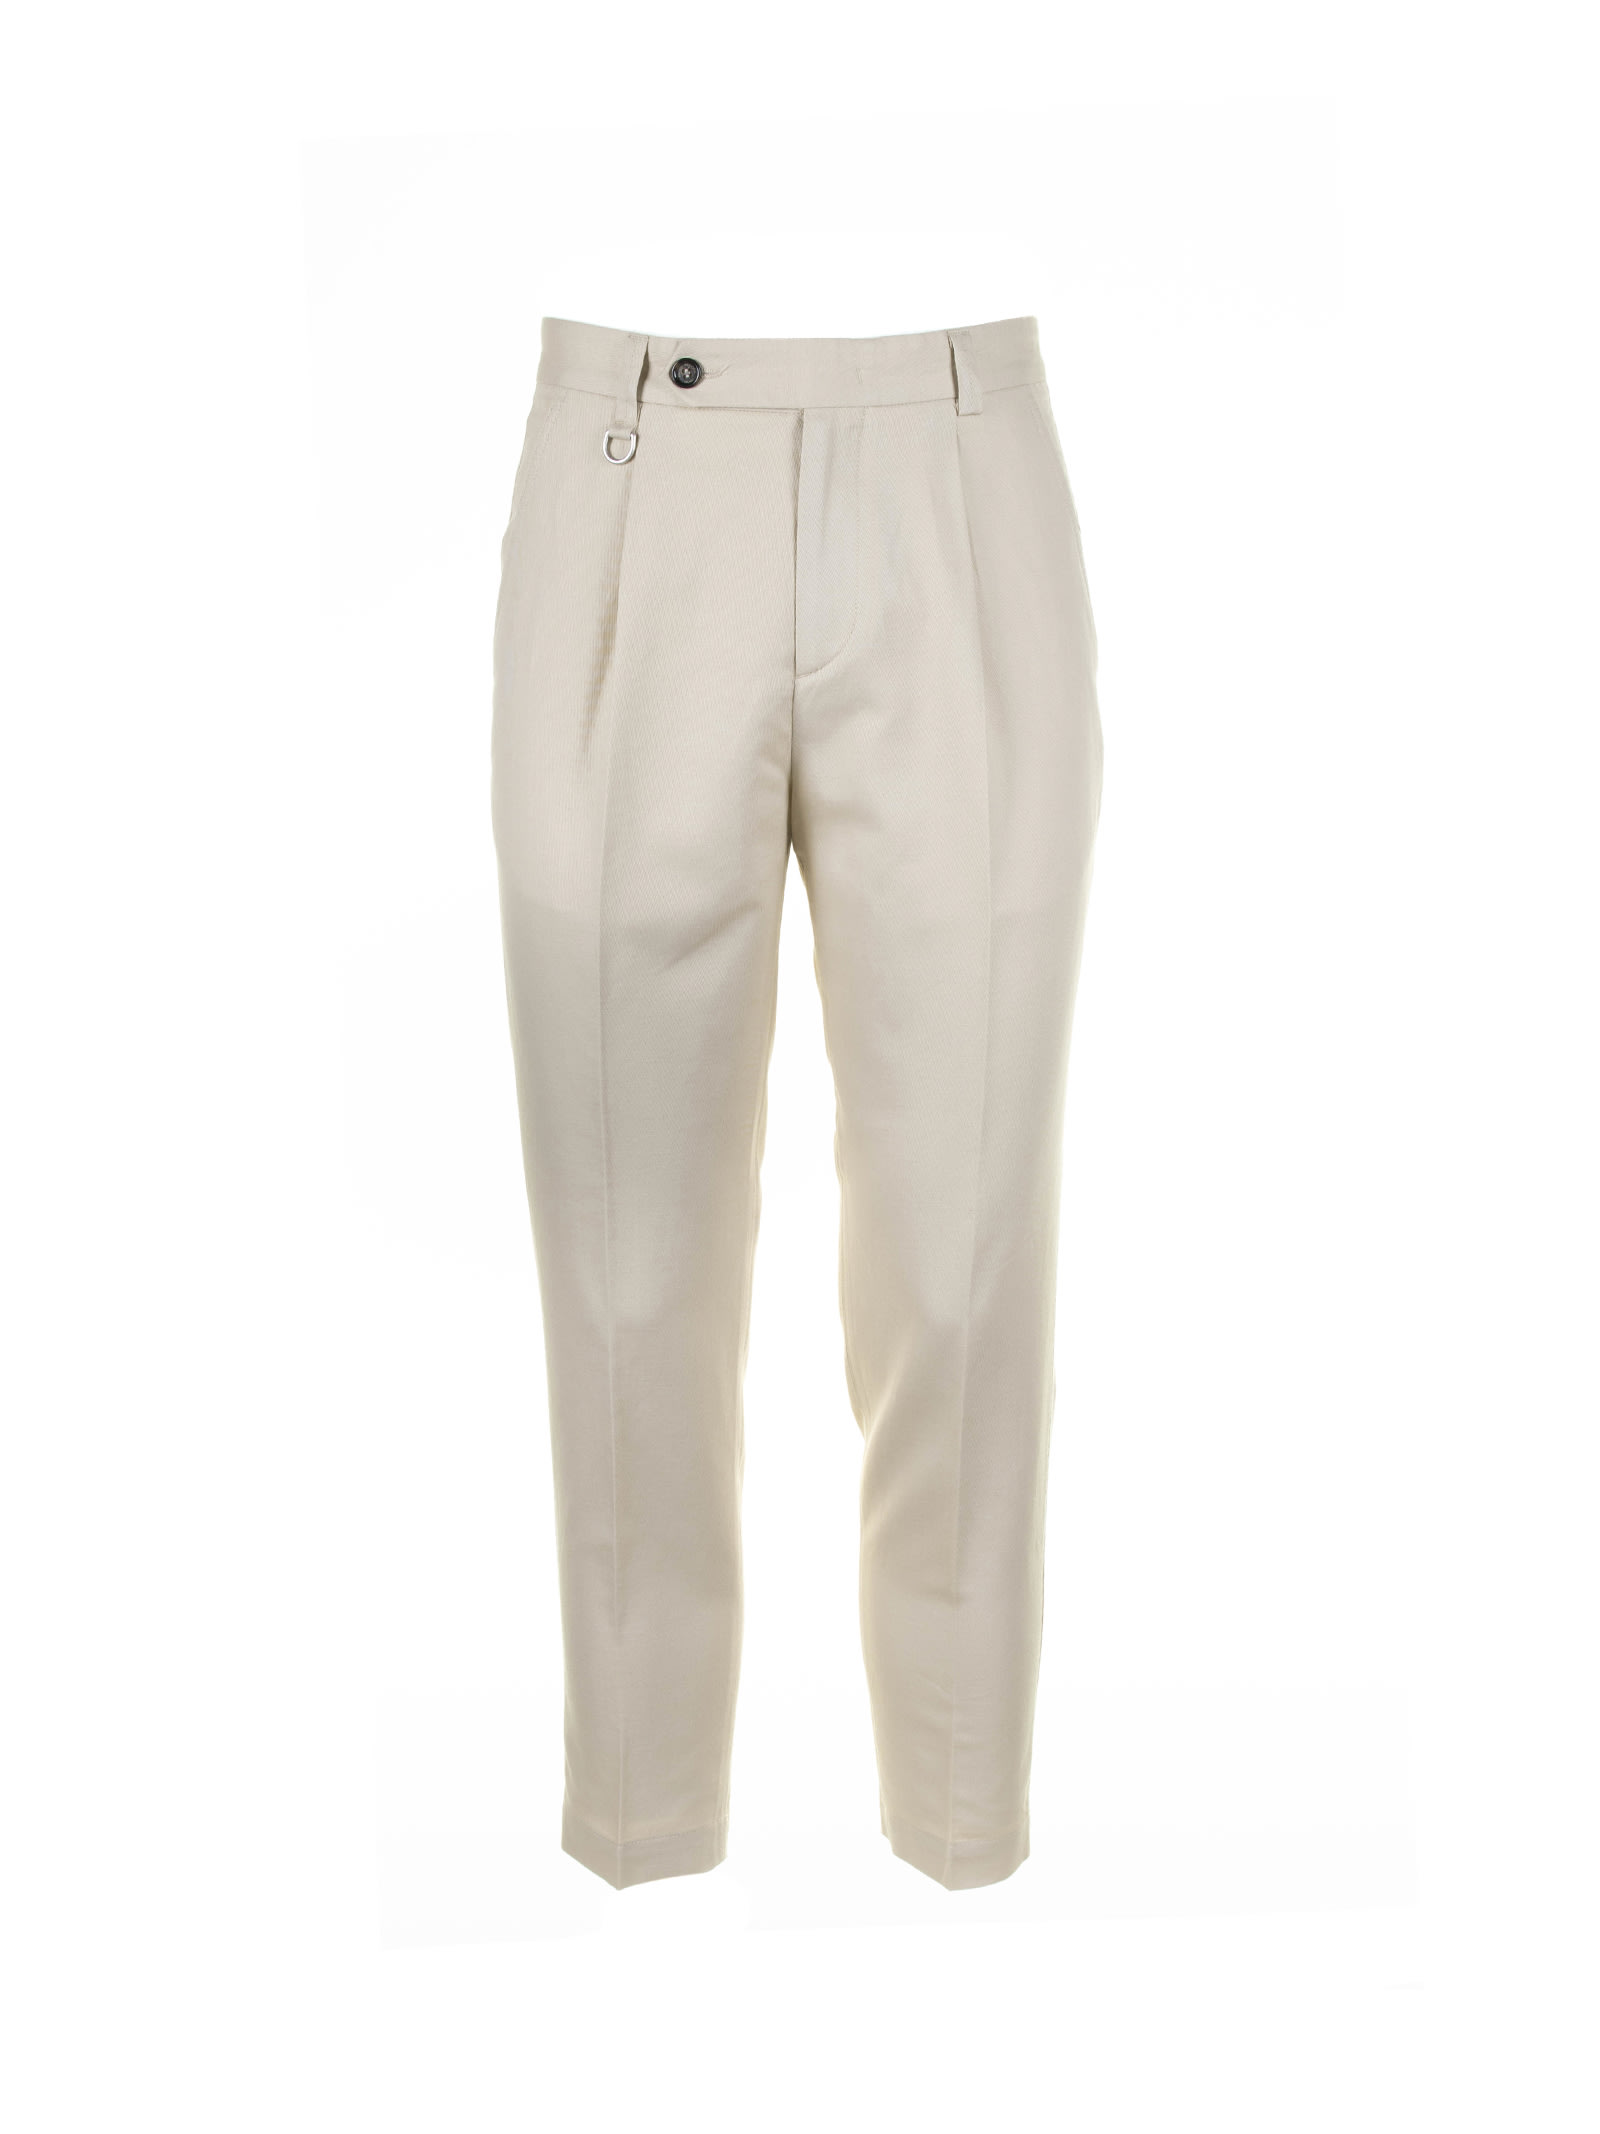 Beige Trousers In Cotton And Linen Blend